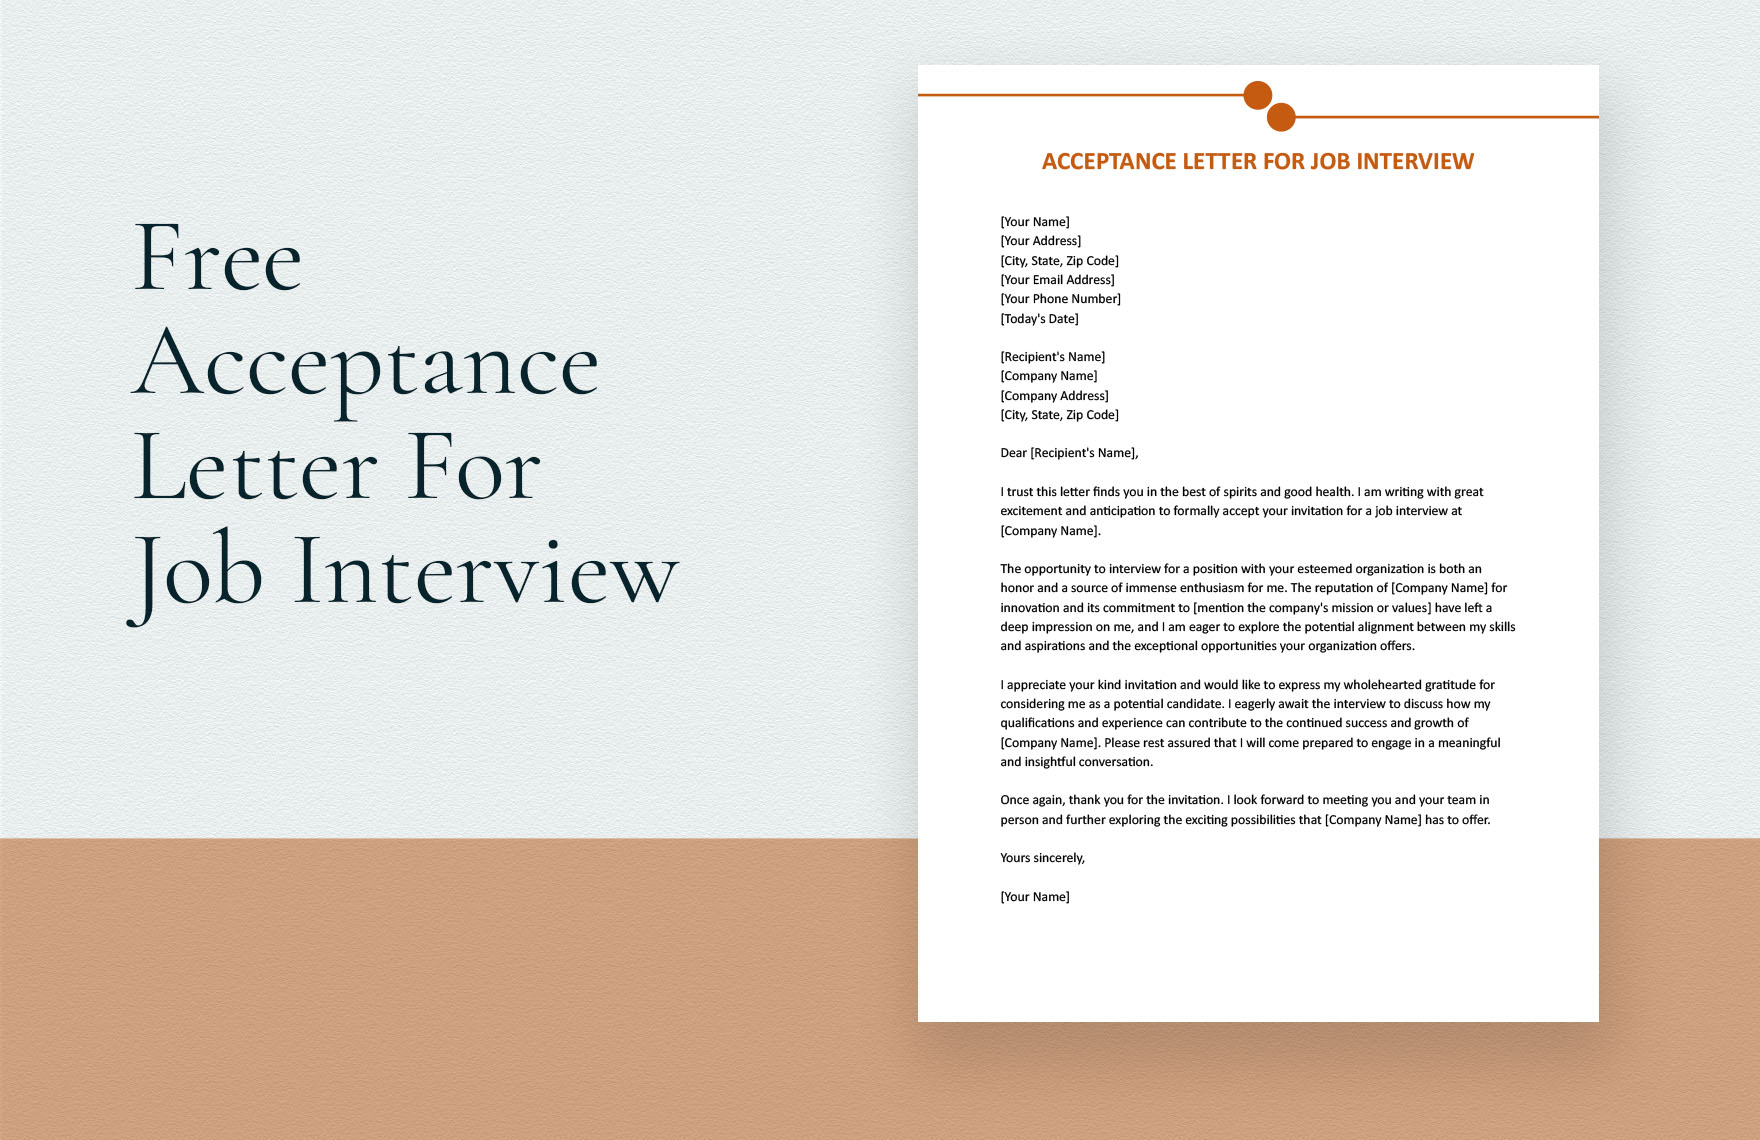 Free Acceptance Letter For Job Interview